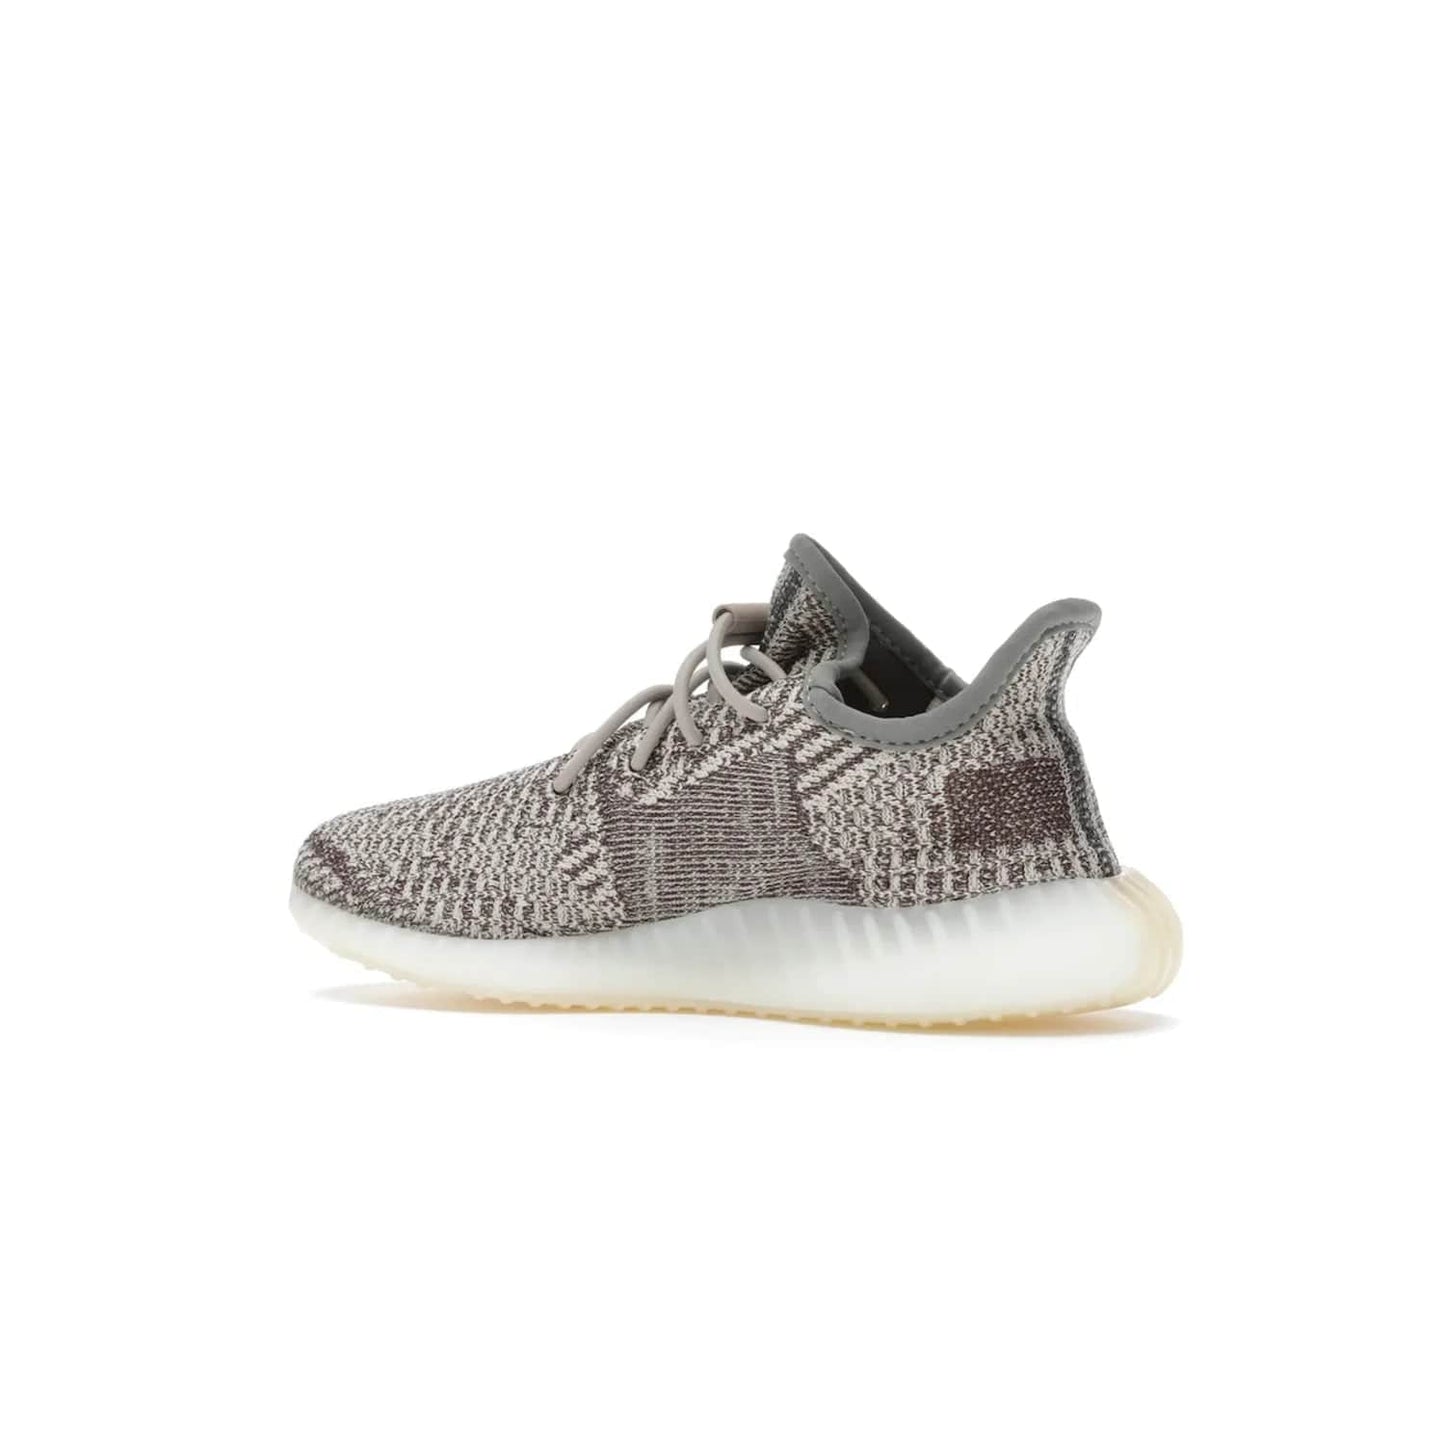 adidas Yeezy Boost 350 V2 Zyon (Kids) - Image 22 - Only at www.BallersClubKickz.com - The adidas Yeezy Boost 350 V2 Zyon (Kids) - perfect pick for fashion-savvy kids. Features soft Primeknit upper, lace closure & colorful patterning. Comfort & style for kids' summer outfits!